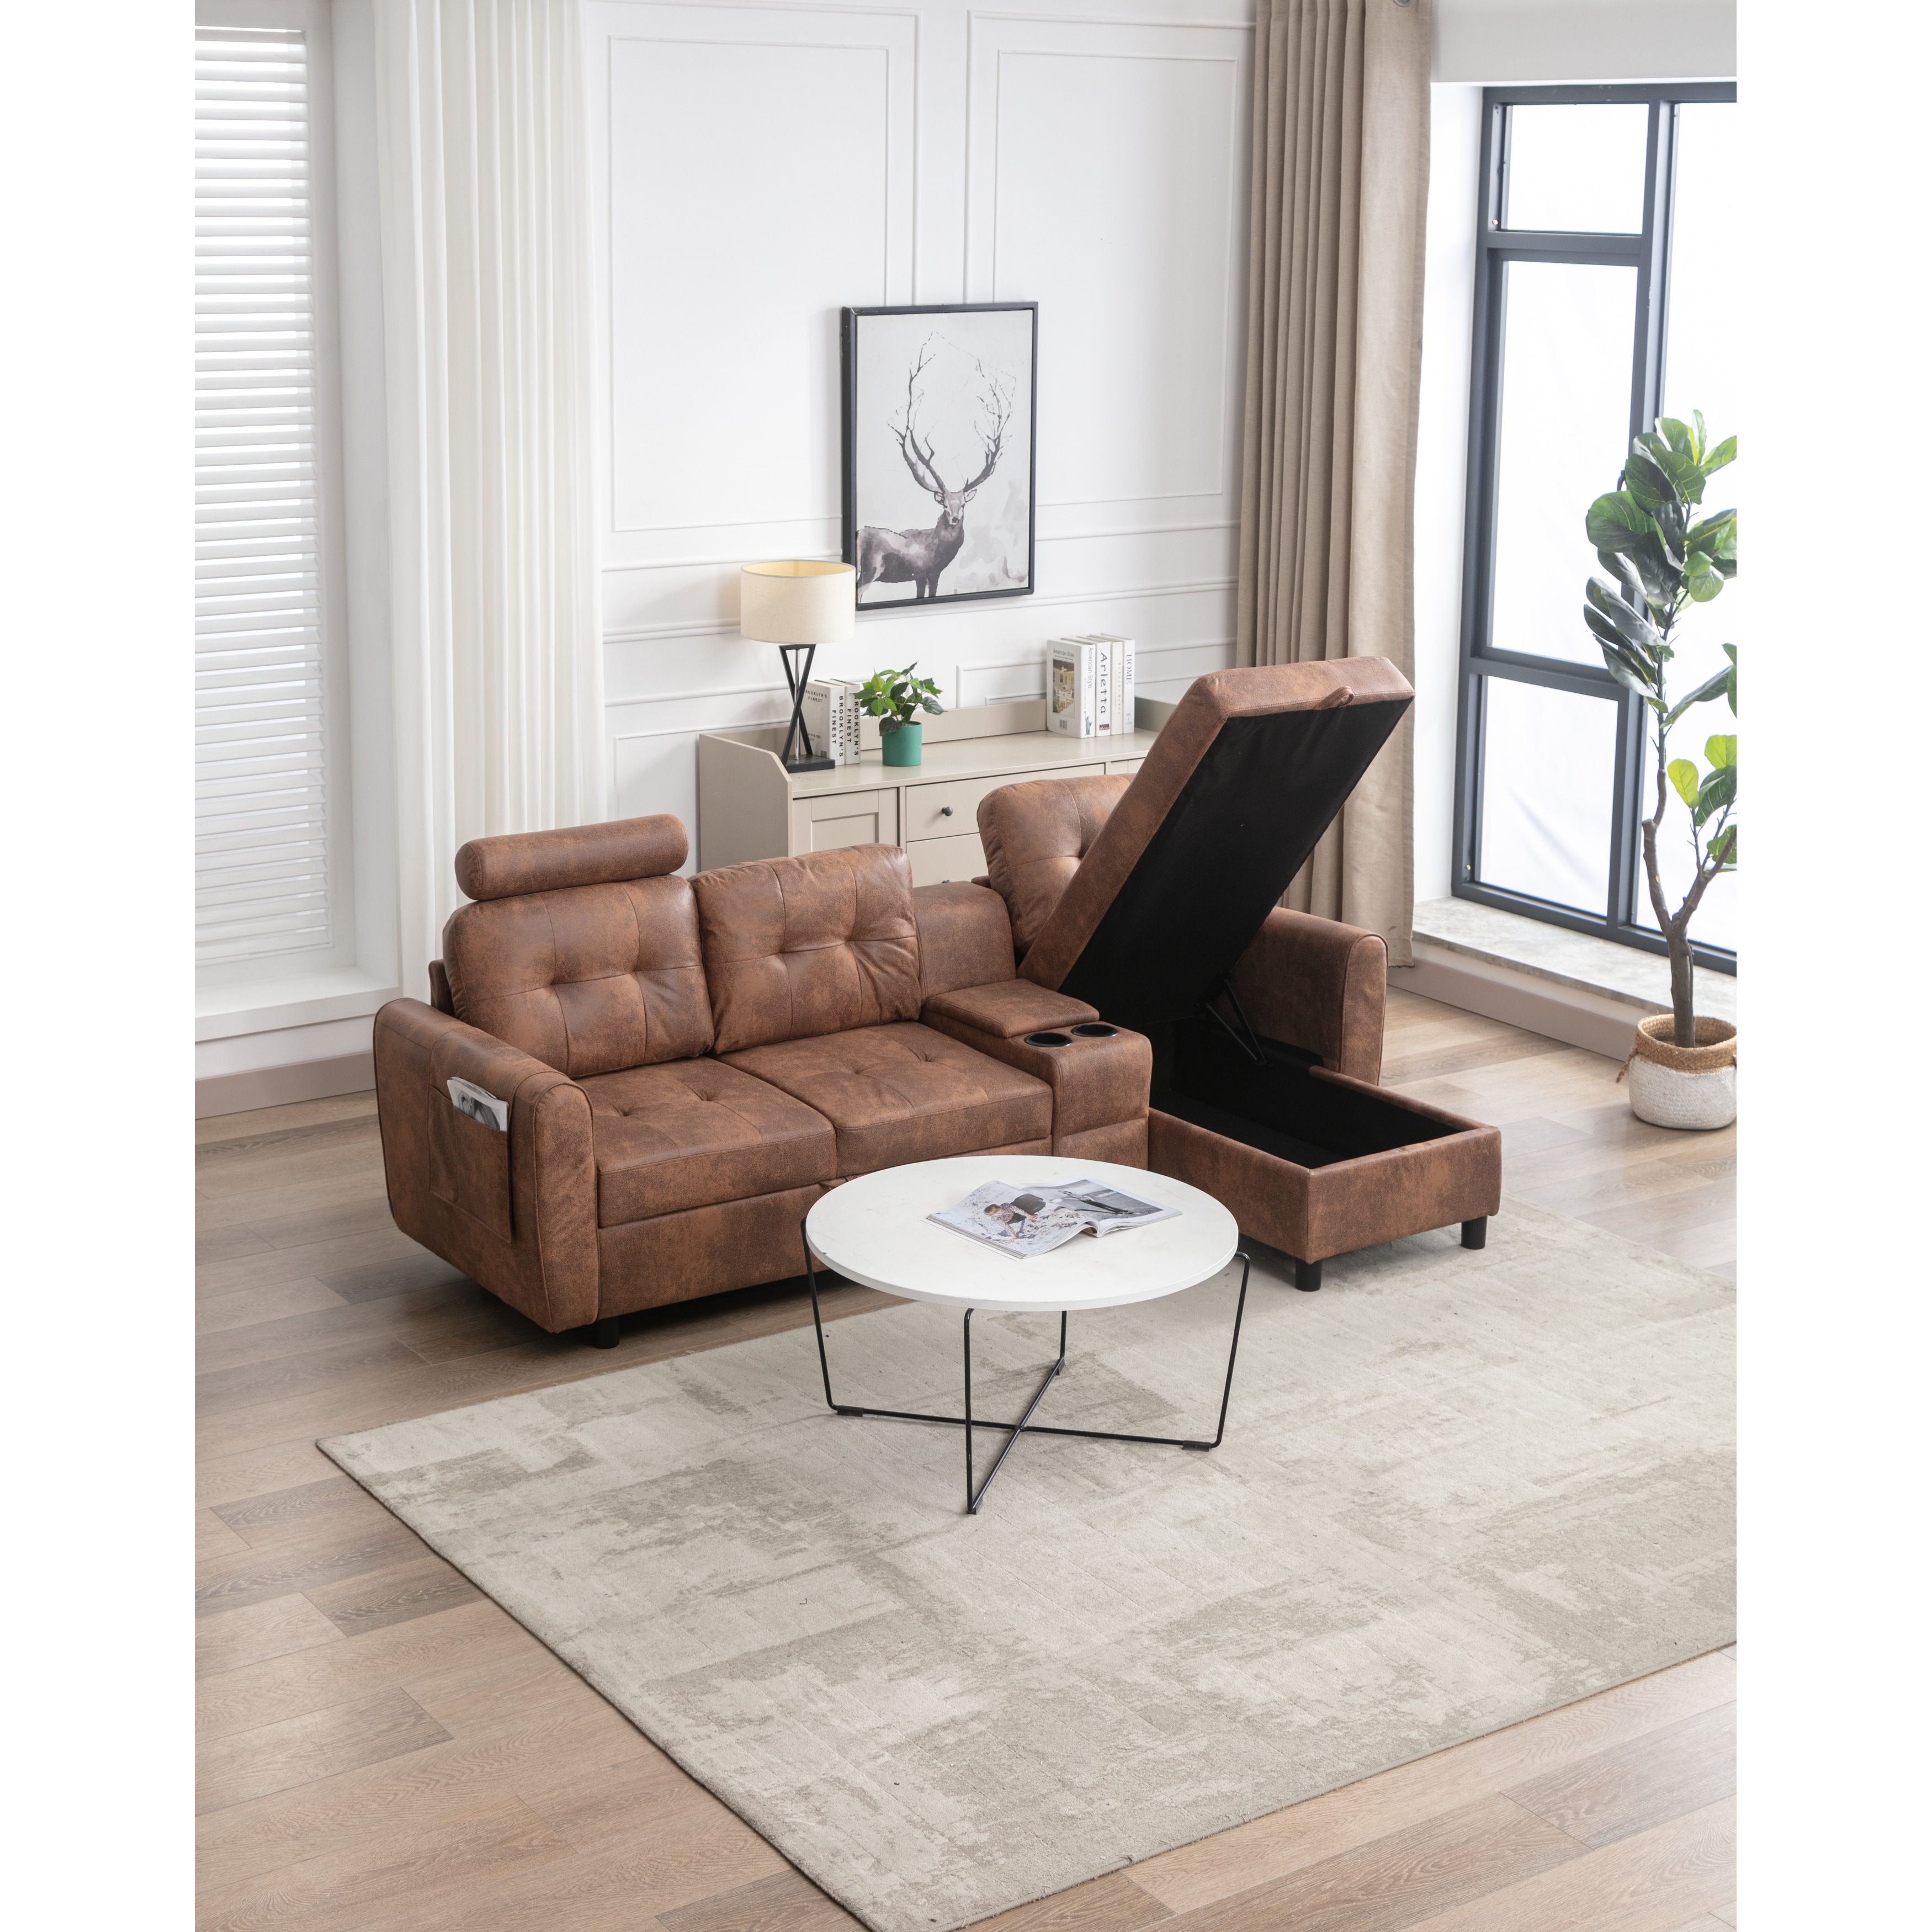 https://ak1.ostkcdn.com/images/products/is/images/direct/36ed8699fe65222825fbfe151870a18af4a68419/Livingroom-Sectional-Sofa-Set-with-Storage-and-Cupholder-Couch-Set.jpg